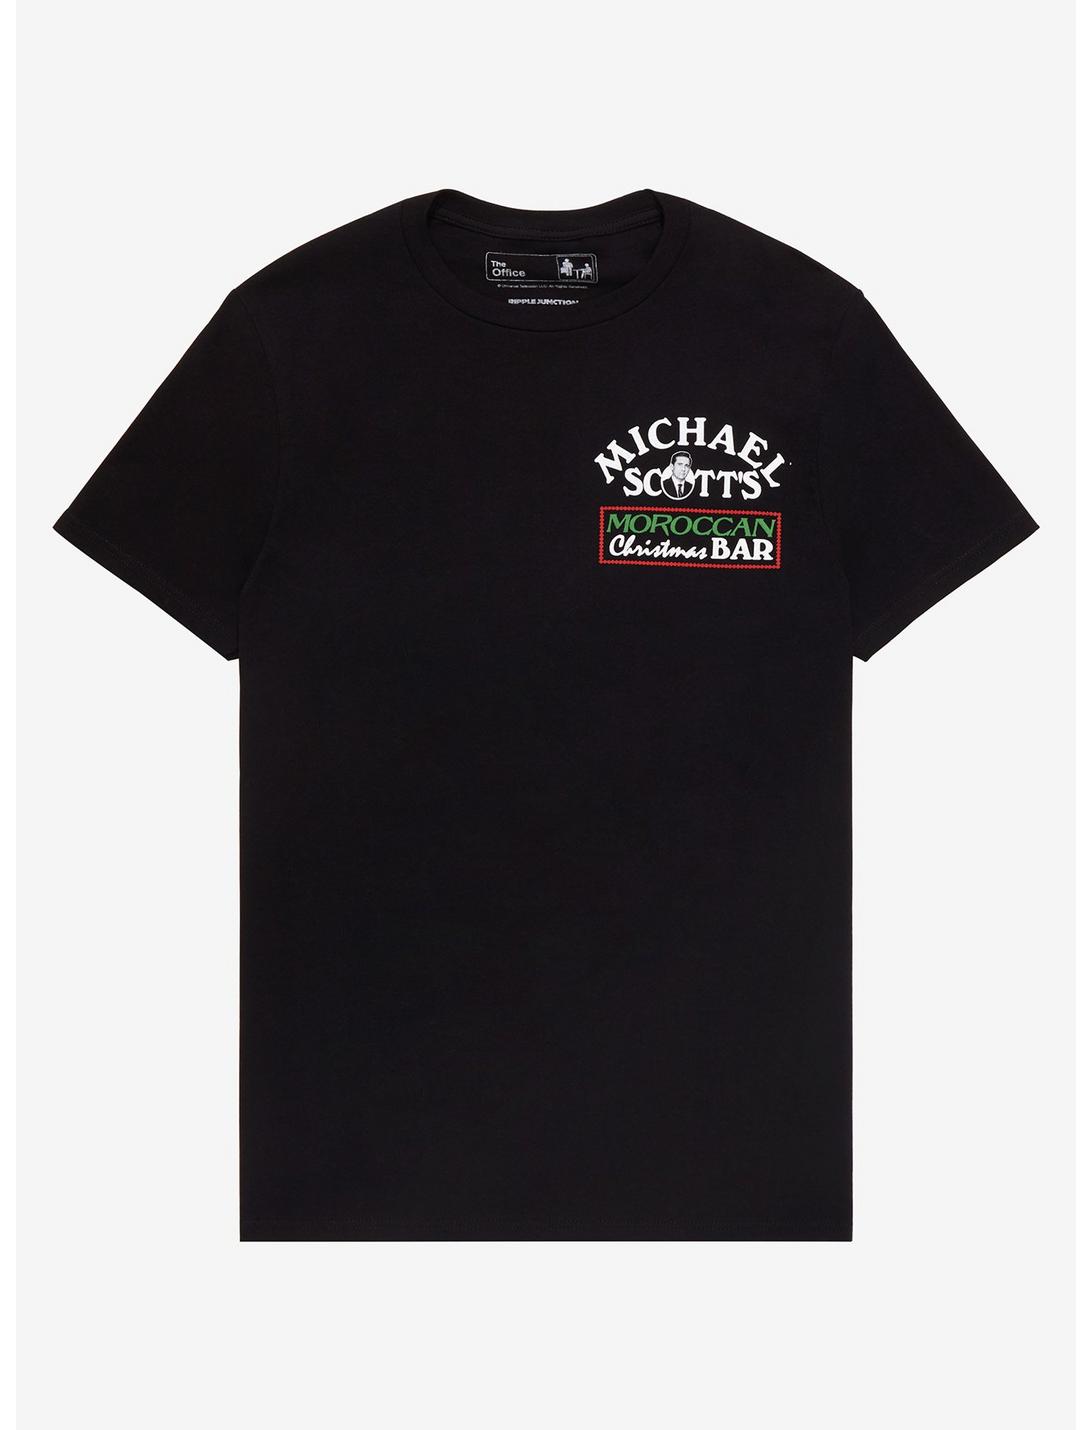 The Office Michael Scott's Moroccan Christmas Bar T-Shirt - BoxLunch Exclusive, BLACK, hi-res